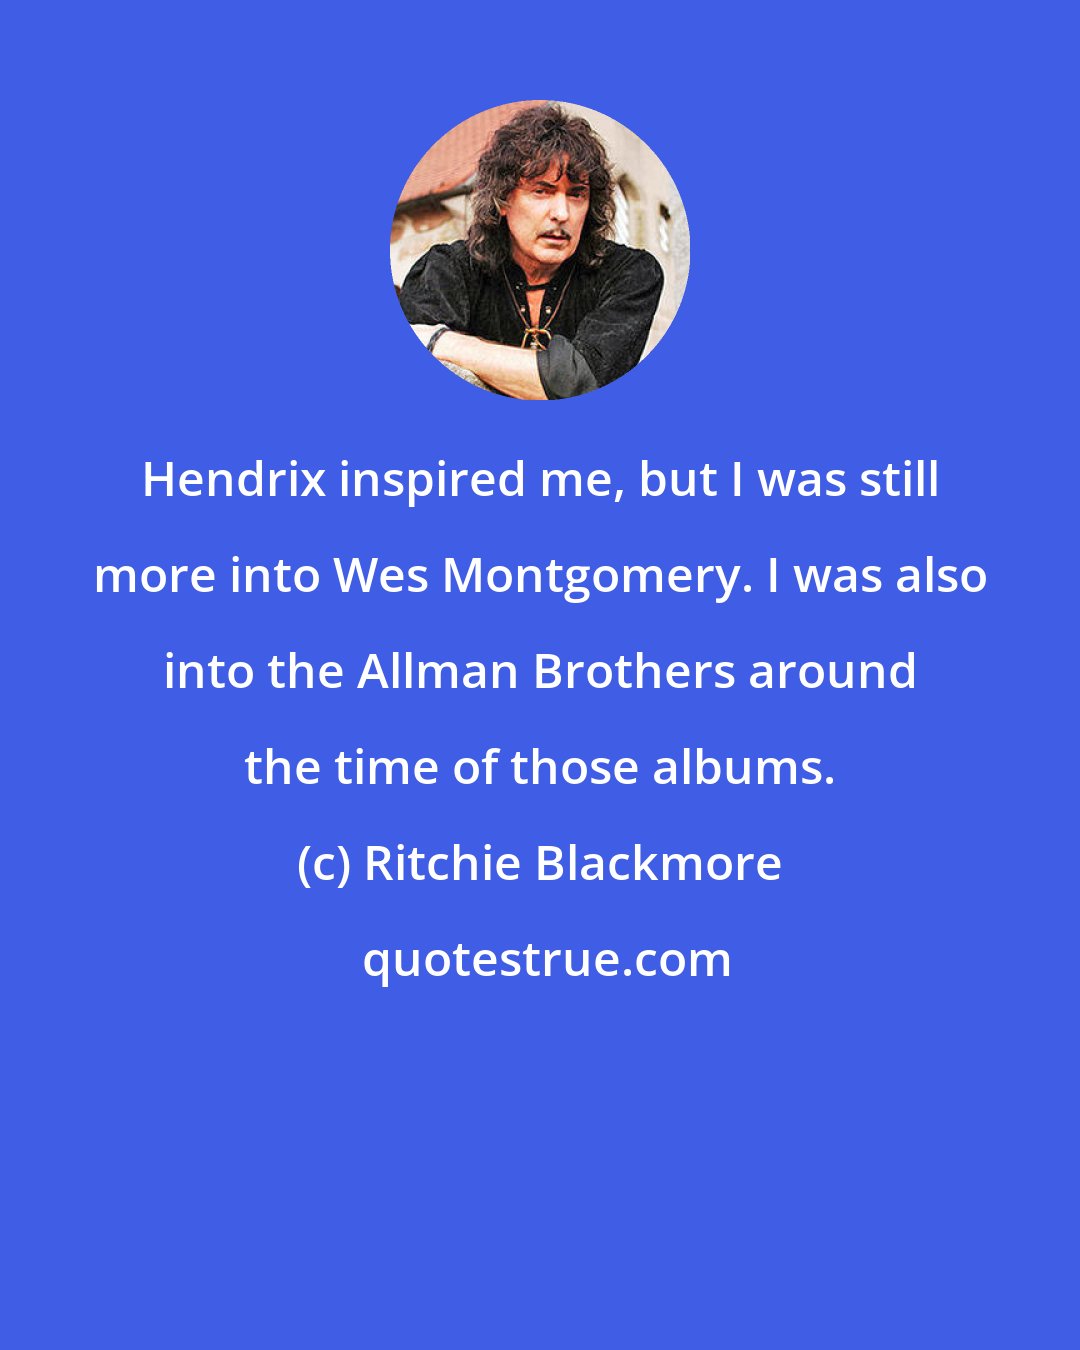 Ritchie Blackmore: Hendrix inspired me, but I was still more into Wes Montgomery. I was also into the Allman Brothers around the time of those albums.